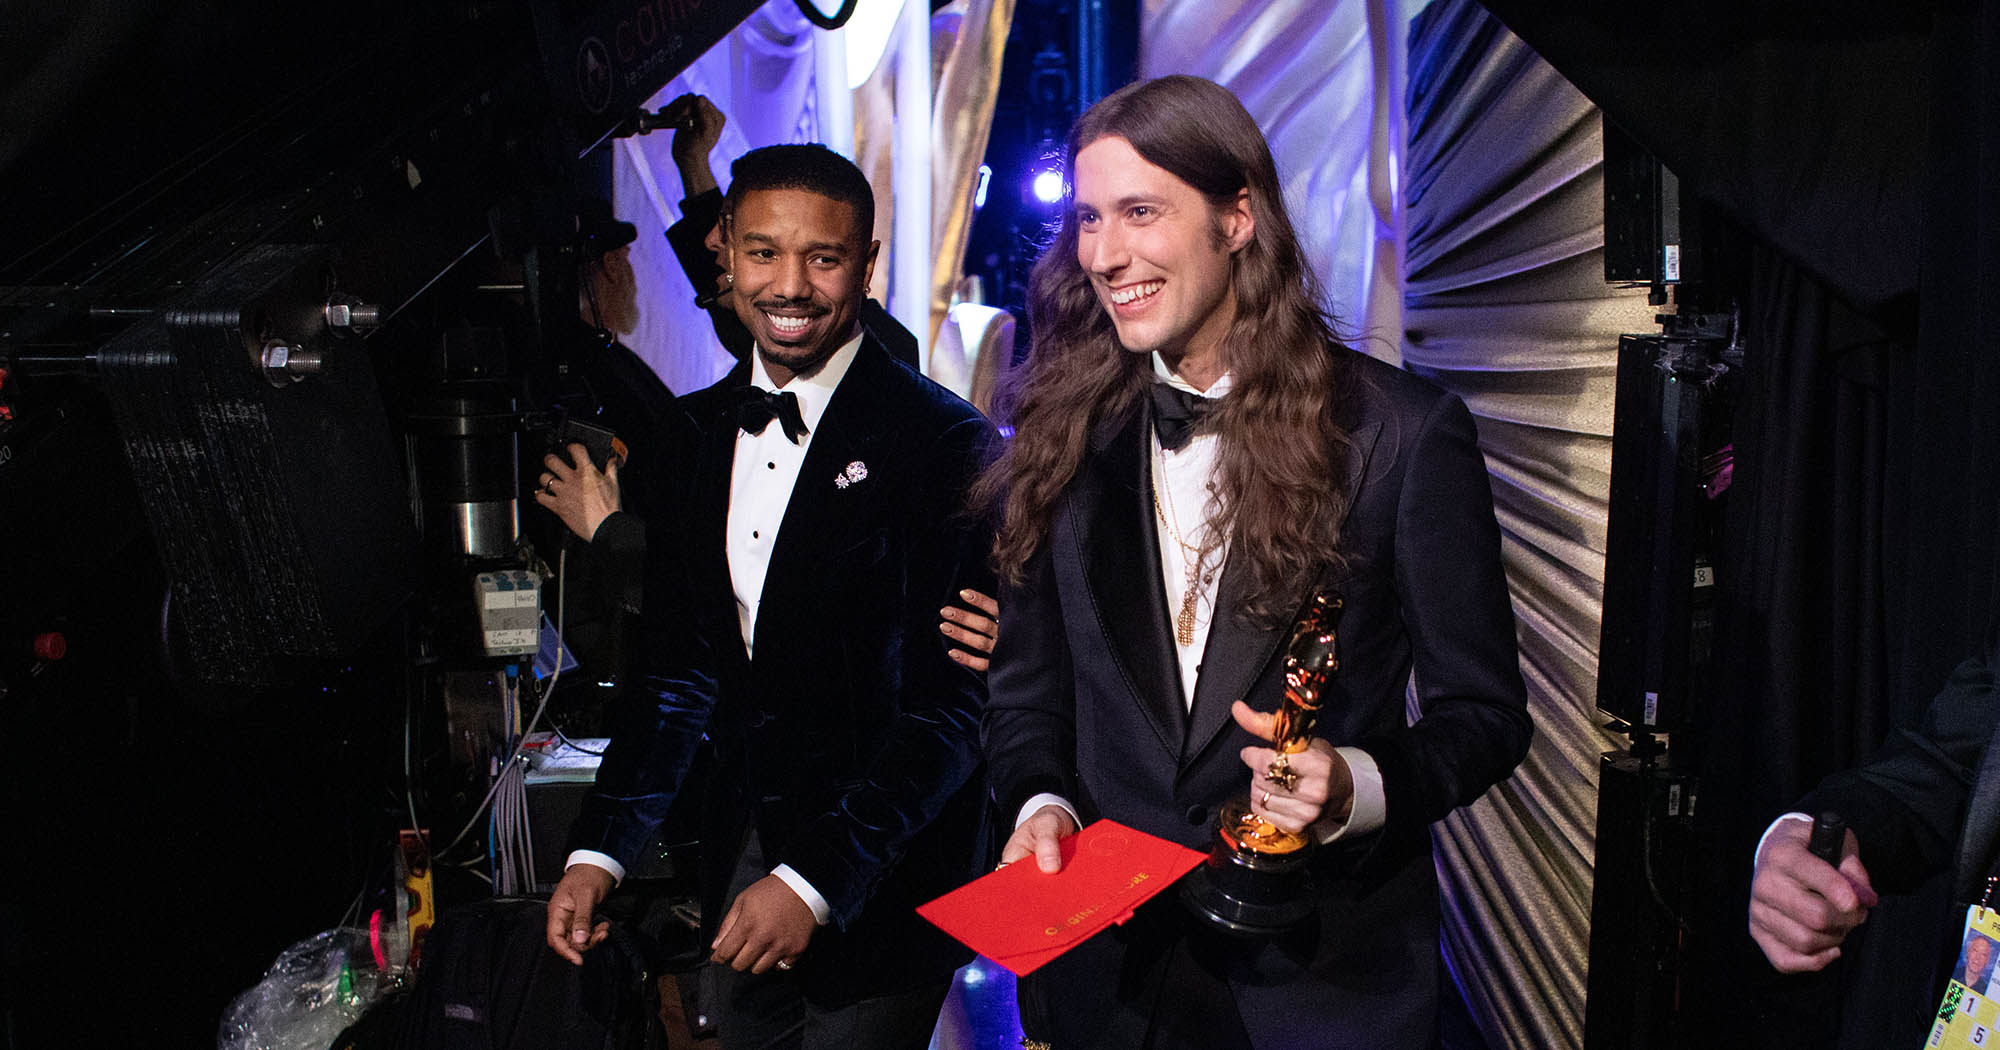 Ludwig Goransson poses backstage with the Oscar® for achievement in music written for motion pictures (original score) during the live ABC telecast of the 91st Oscars® at the Dolby® Theatre in Hollywood, CA on Sunday, February 24, 2019. (Photo by Matt Sayles / A.M.P.A.S)